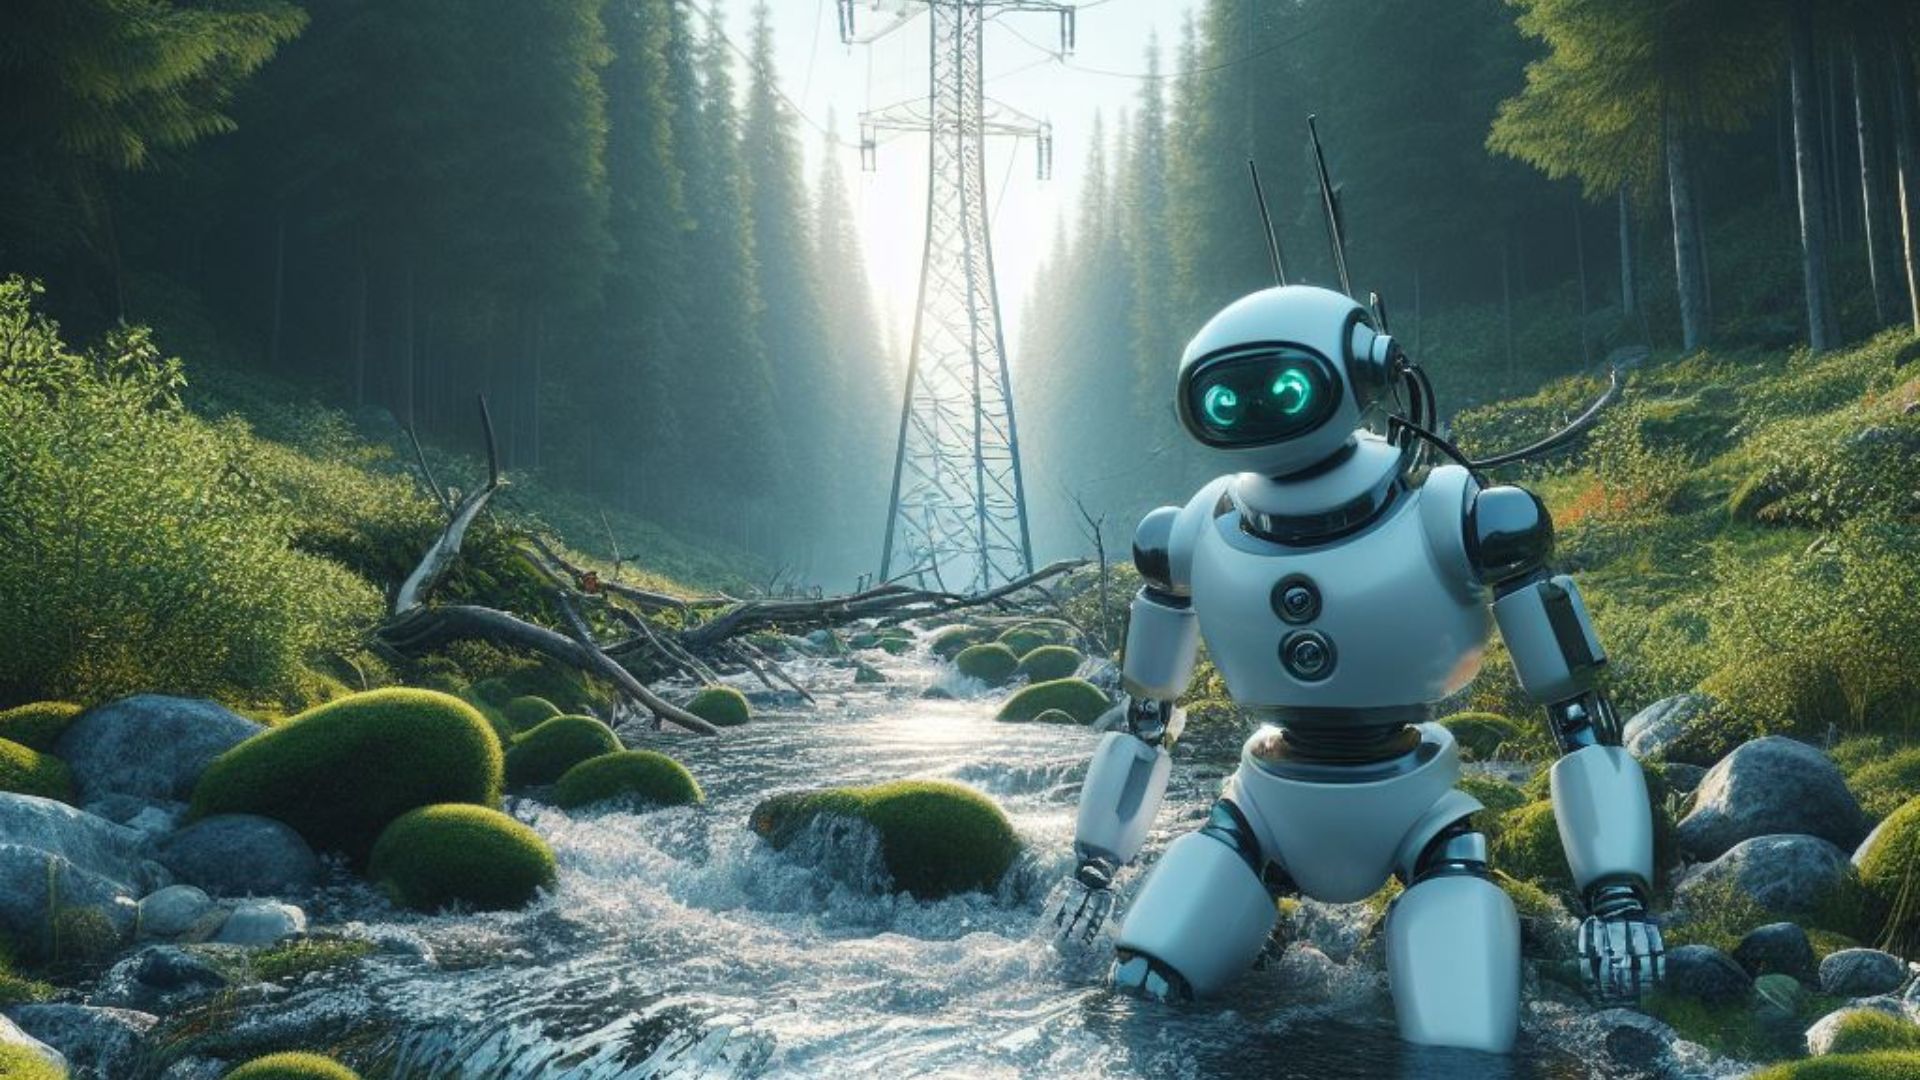 Robot in the forest with a water stream and power lines